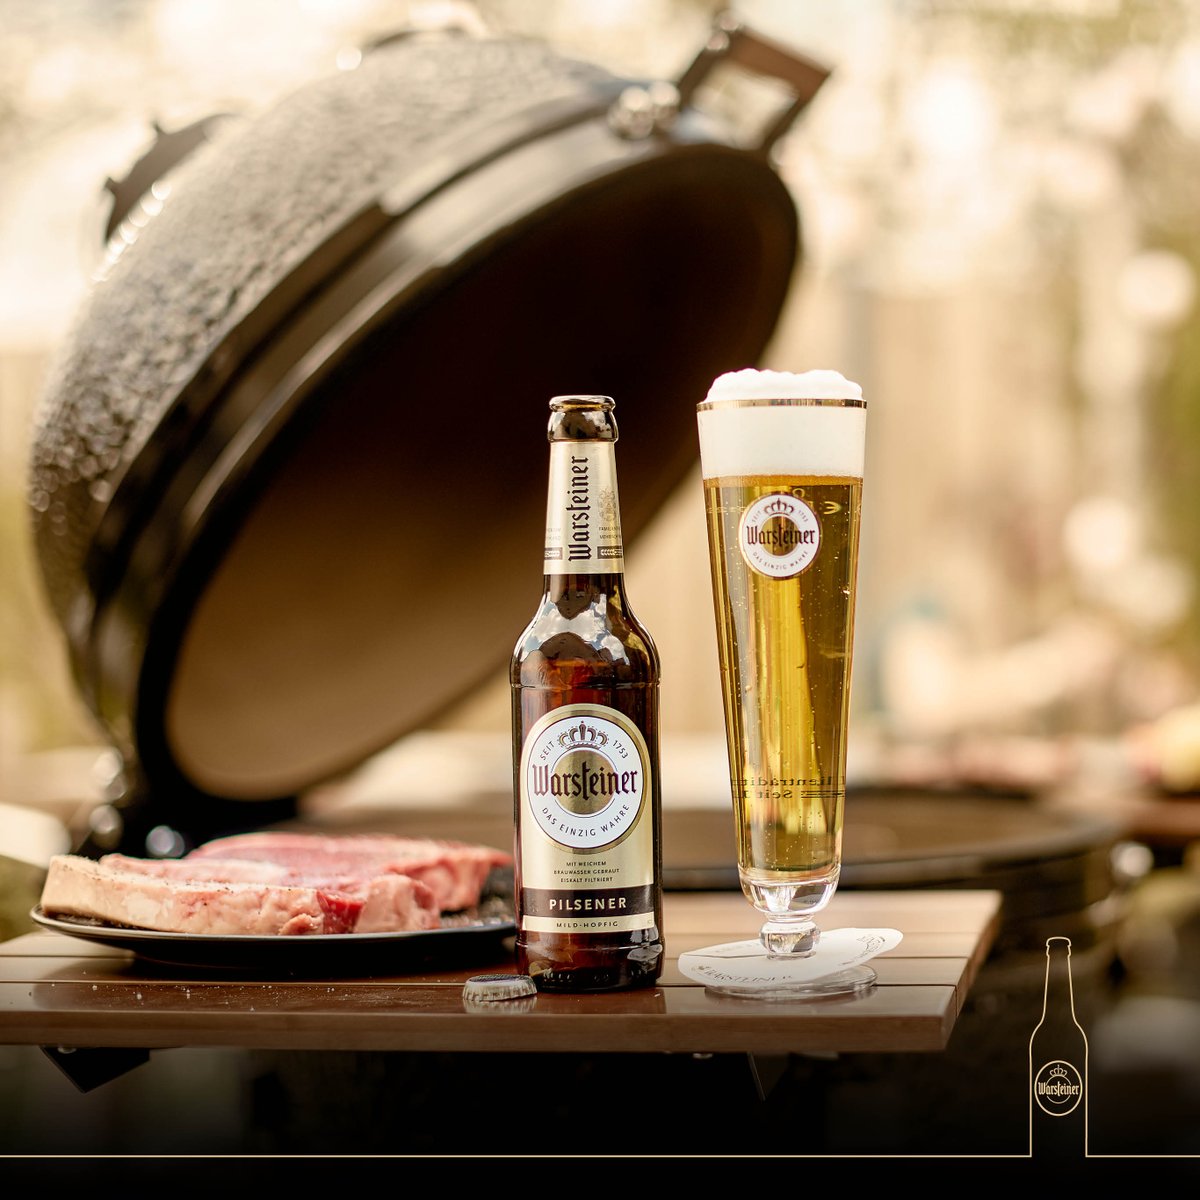 Are you in good company? #warsteinerusa bit.ly/2ka24cM